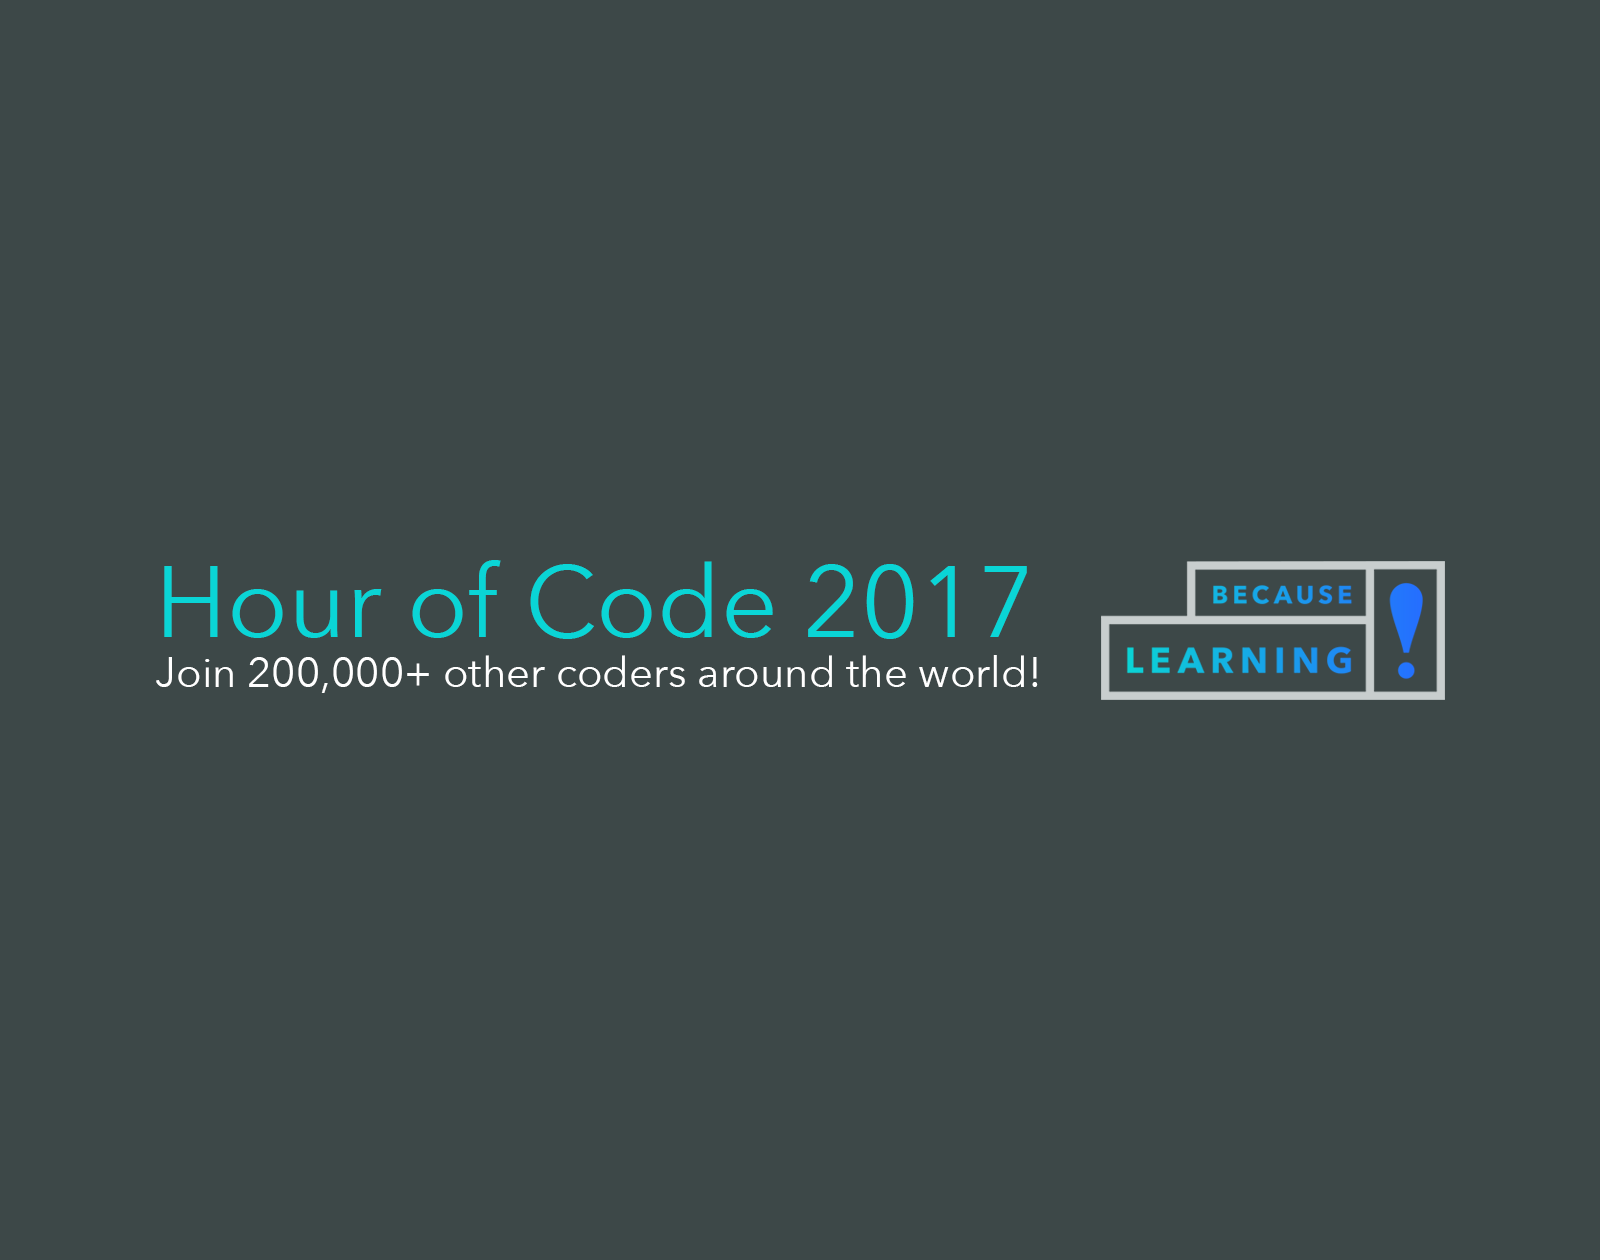 because learning hour of code 2017-2